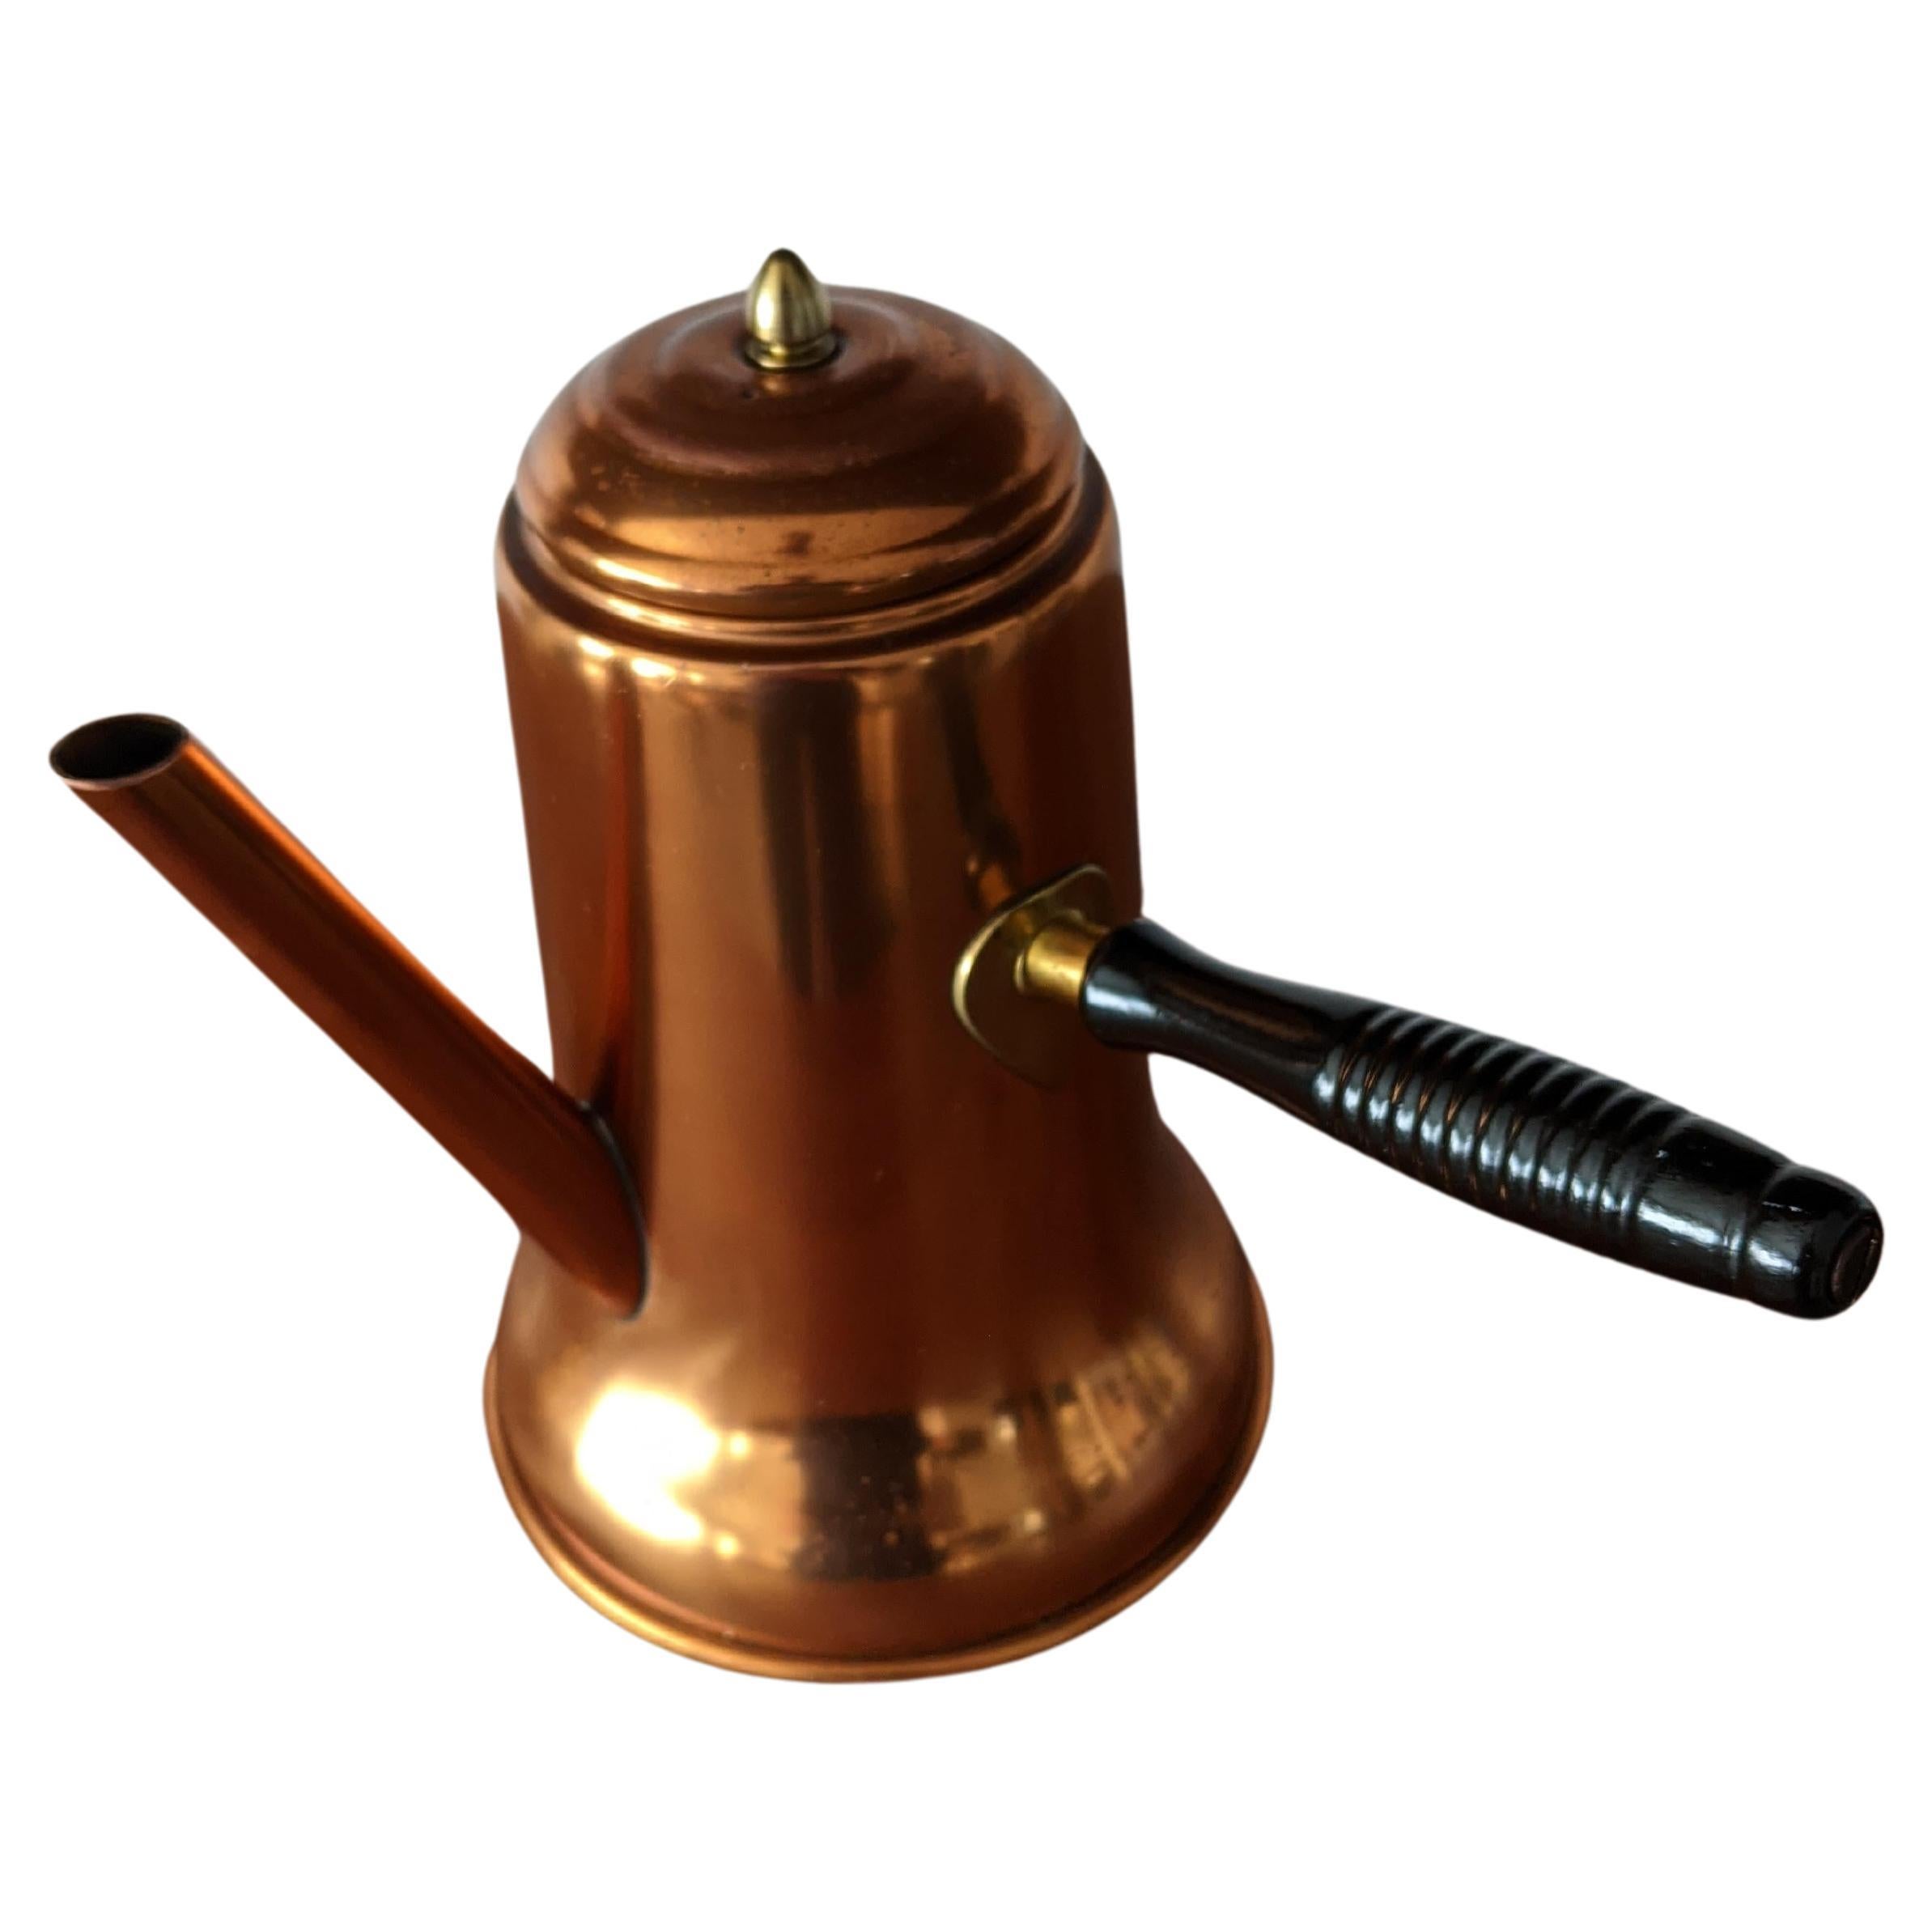 1970s Coppercraft Guild Turkish Style Kettle For Sale